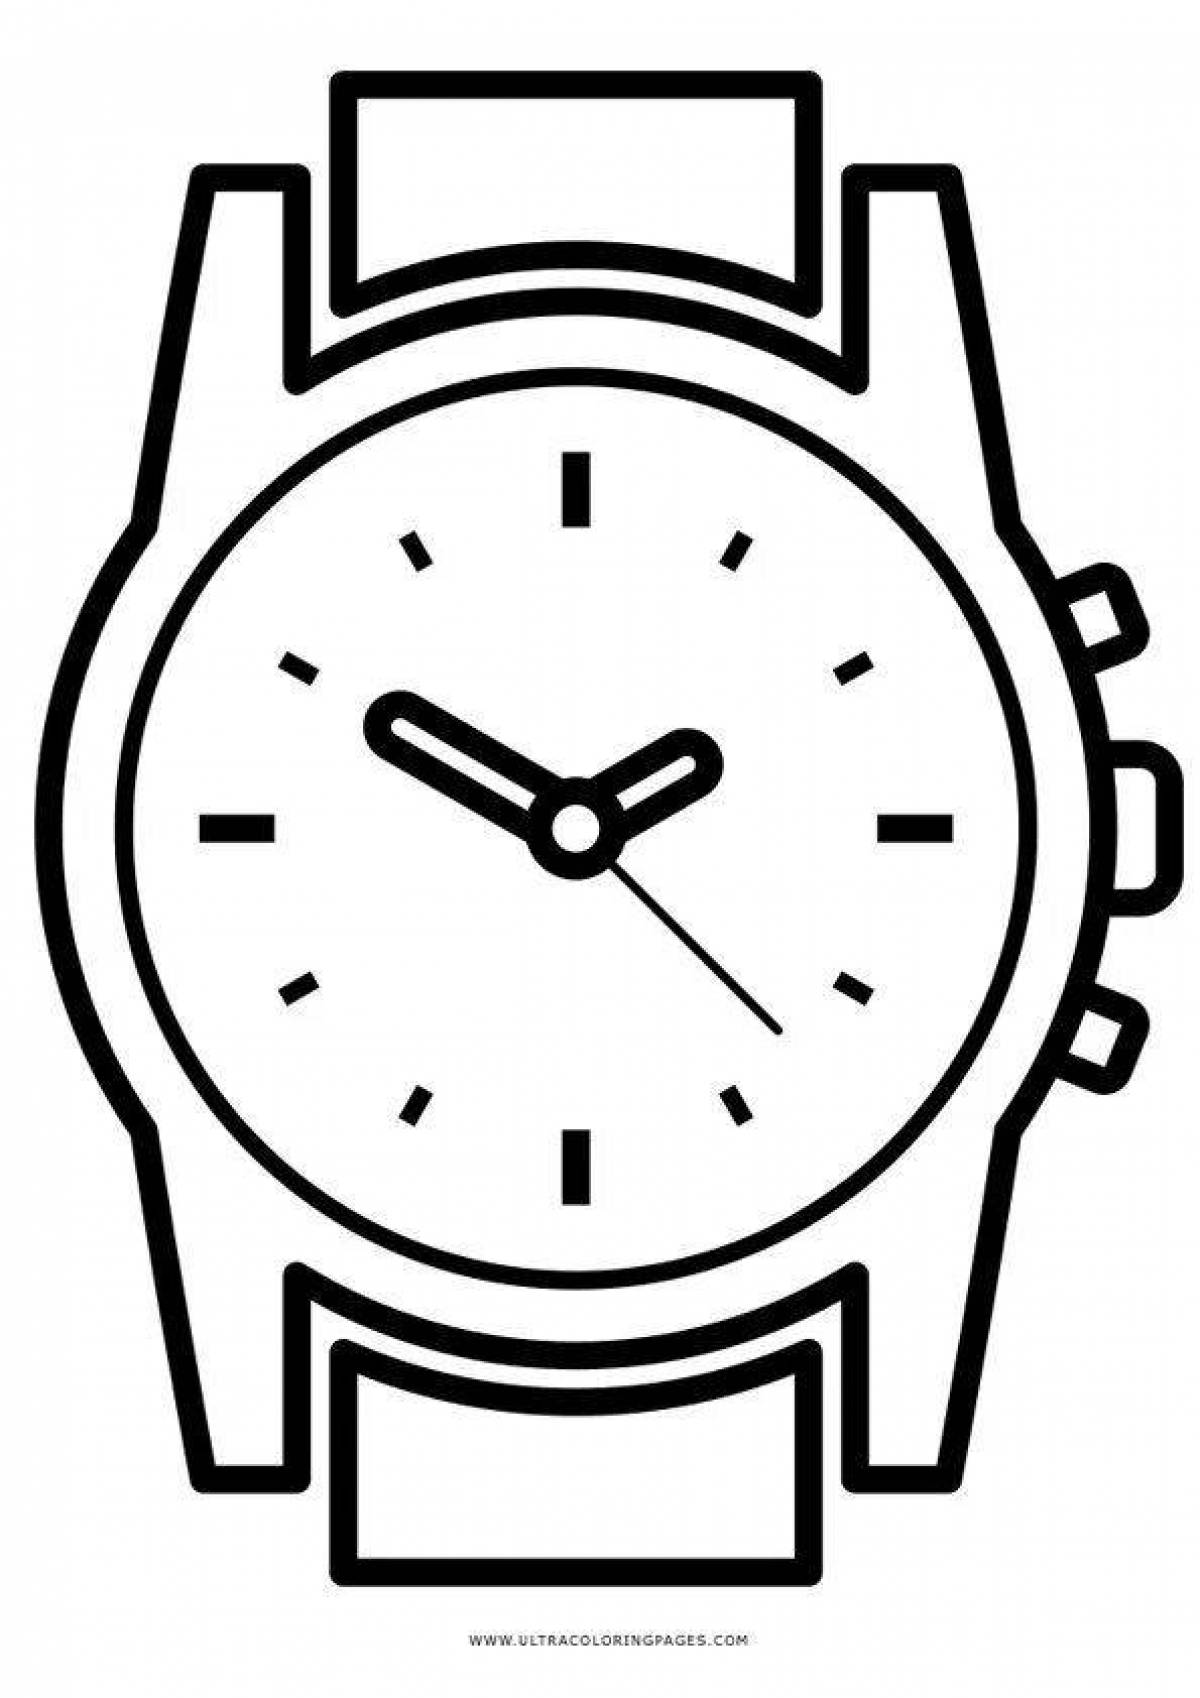 Fancy wristwatch coloring page